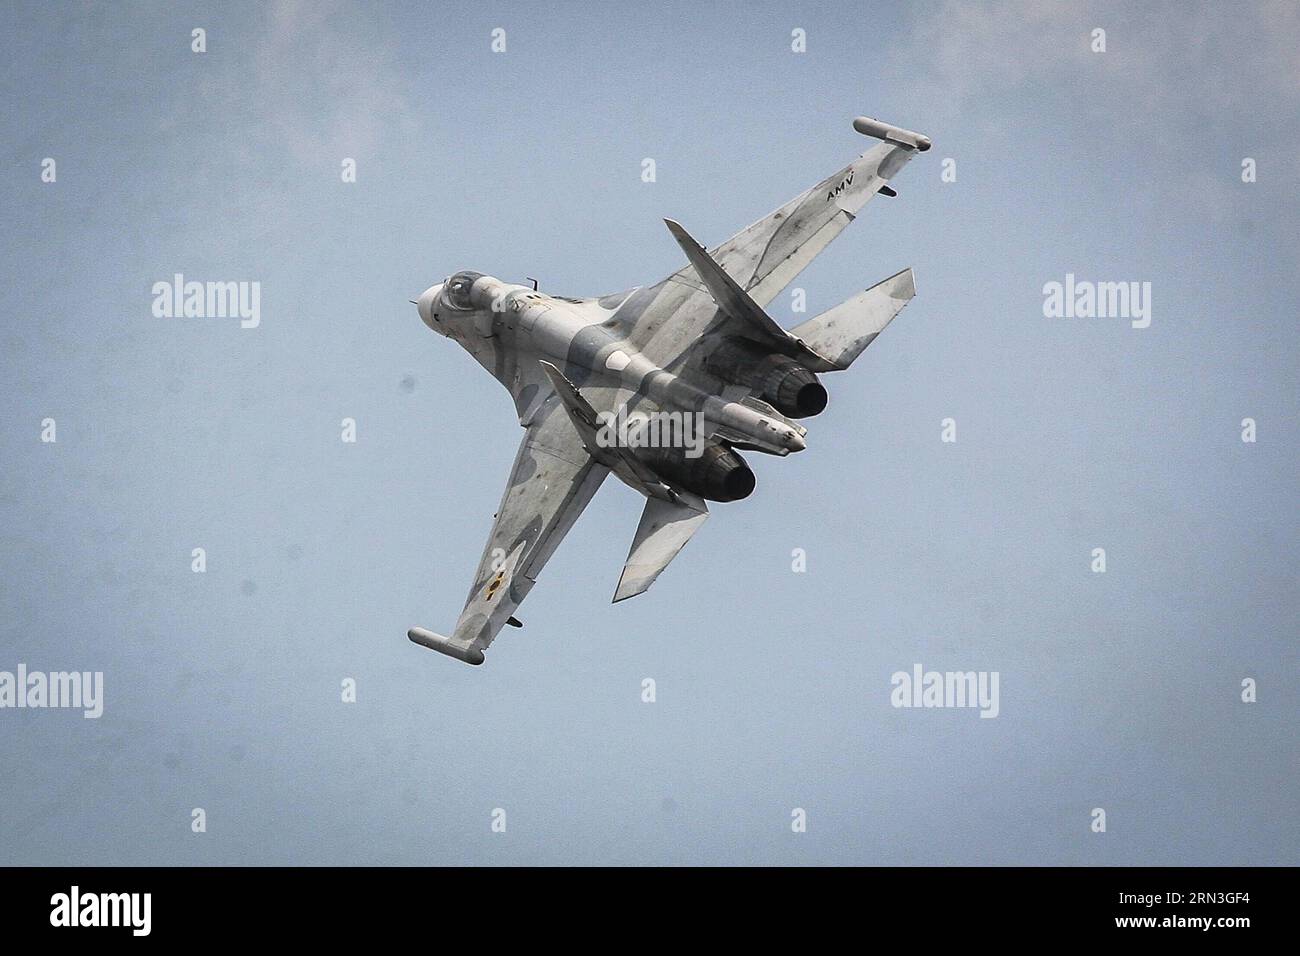 (150415) -- APURE, April 15, 2015 -- A Sukhoi SU30 jet fighter of the Bolivarian Armed National Force (FANB) takes part in the military exercise 2015 Sovereign Shield in San Carlos del Meta, Apure state, Venezuela, on April 15, 2015. The FANB held a military exercise of antiaircraft artillery drill 2015 Sovereign Shield with the participation of 480 military members, according to local press. Boris Vergara) (azp) VENEZUELA-APURE-MILITARY-EXERCISE e BorisxVergara PUBLICATIONxNOTxINxCHN   April 15 2015 a Sukhoi SU30 Jet Fighter of The Bolivarian Armed National Force  Takes Part in The Military E Stock Photo